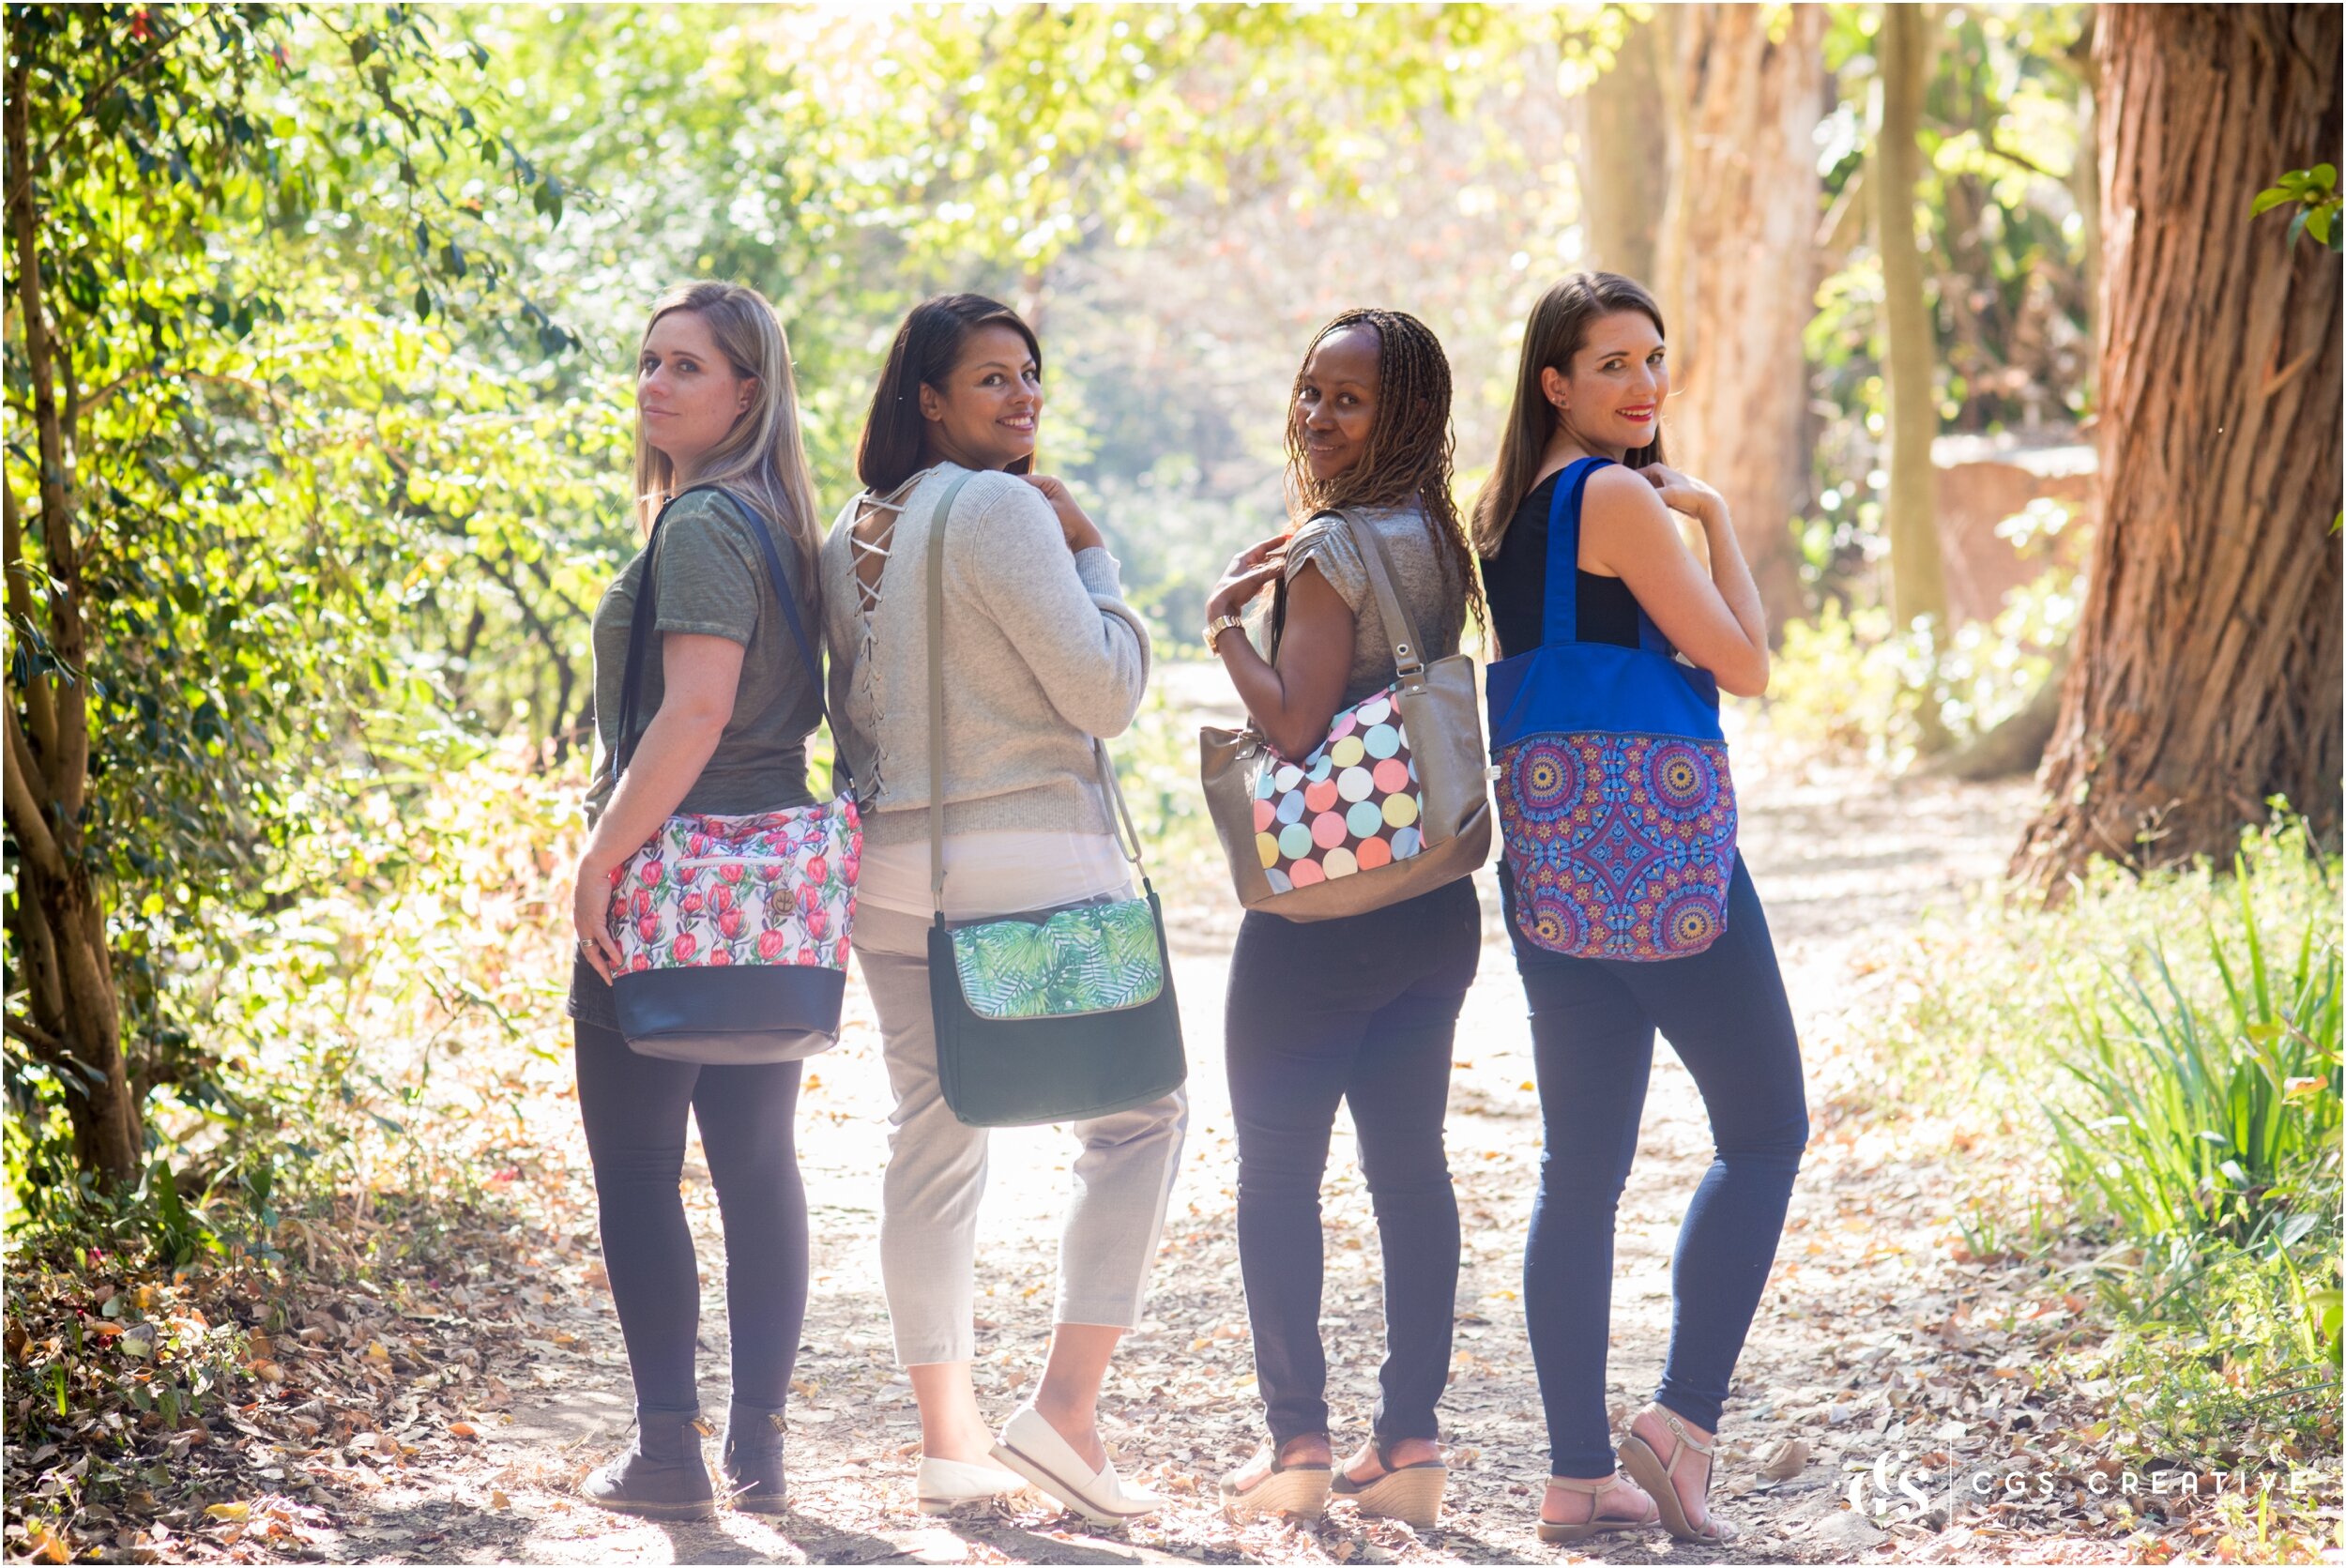 Jum Designs Bags of Style Handcrafted in South Africa Brand Photoshoot by Roxy Hutton CGScreative (92 of 130).jpg